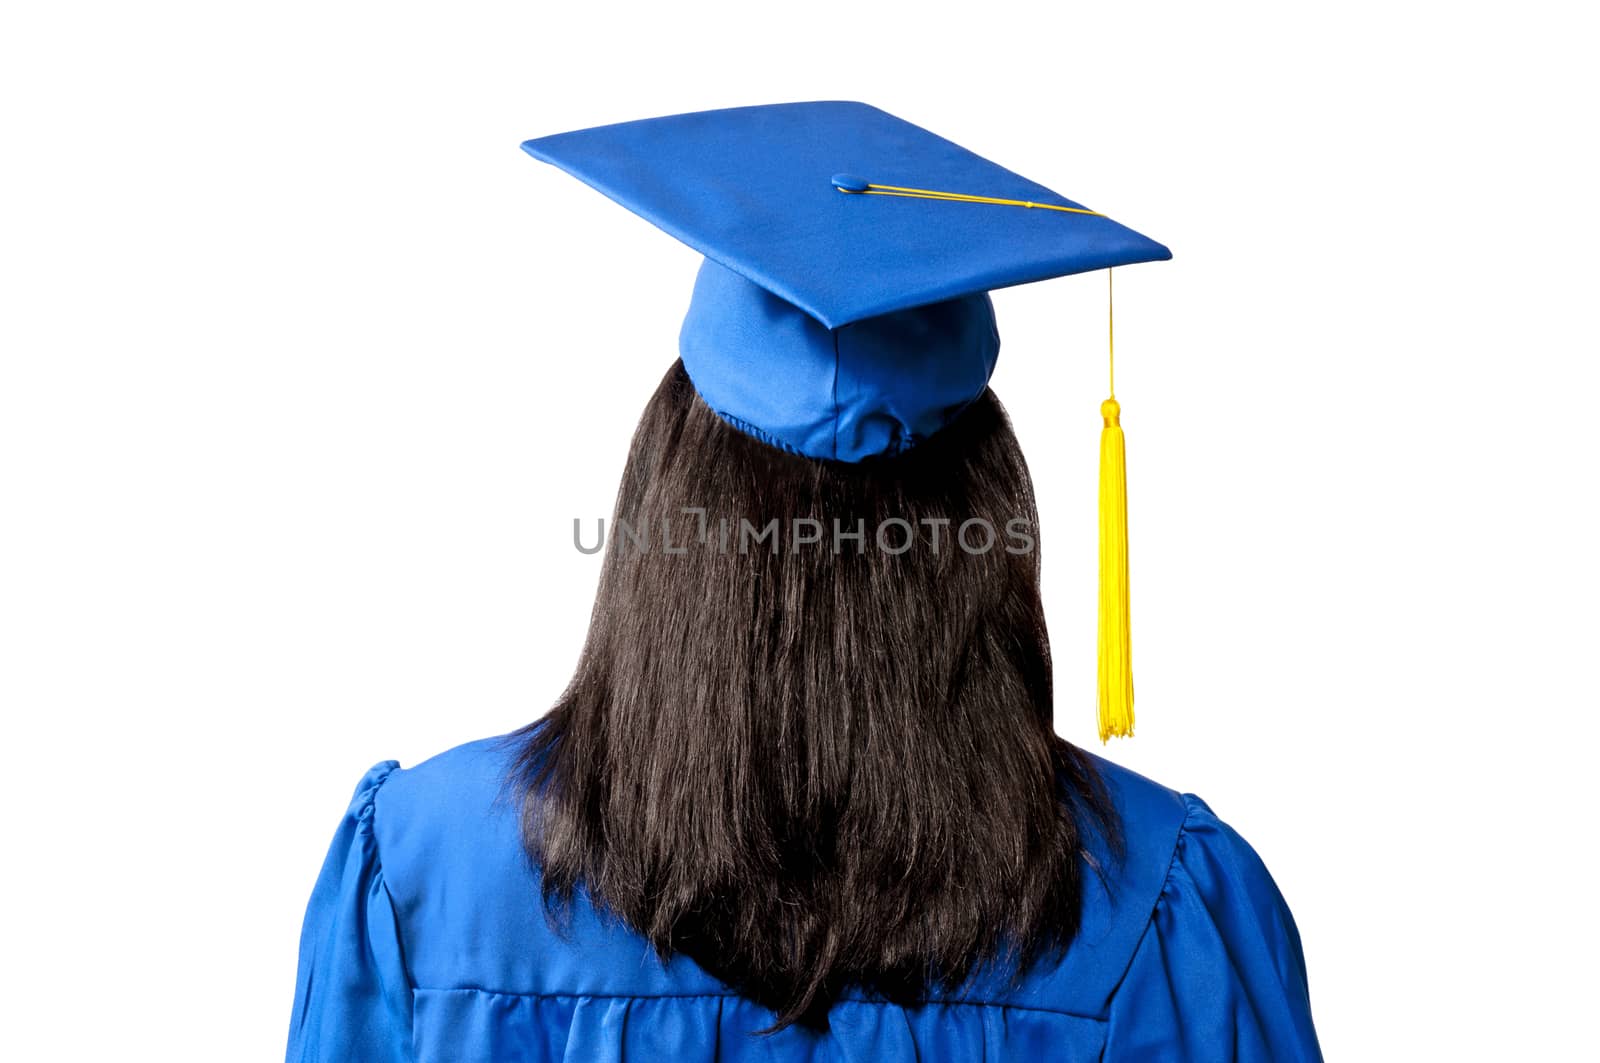 Female Graduate Seen From The Back by stockbuster1